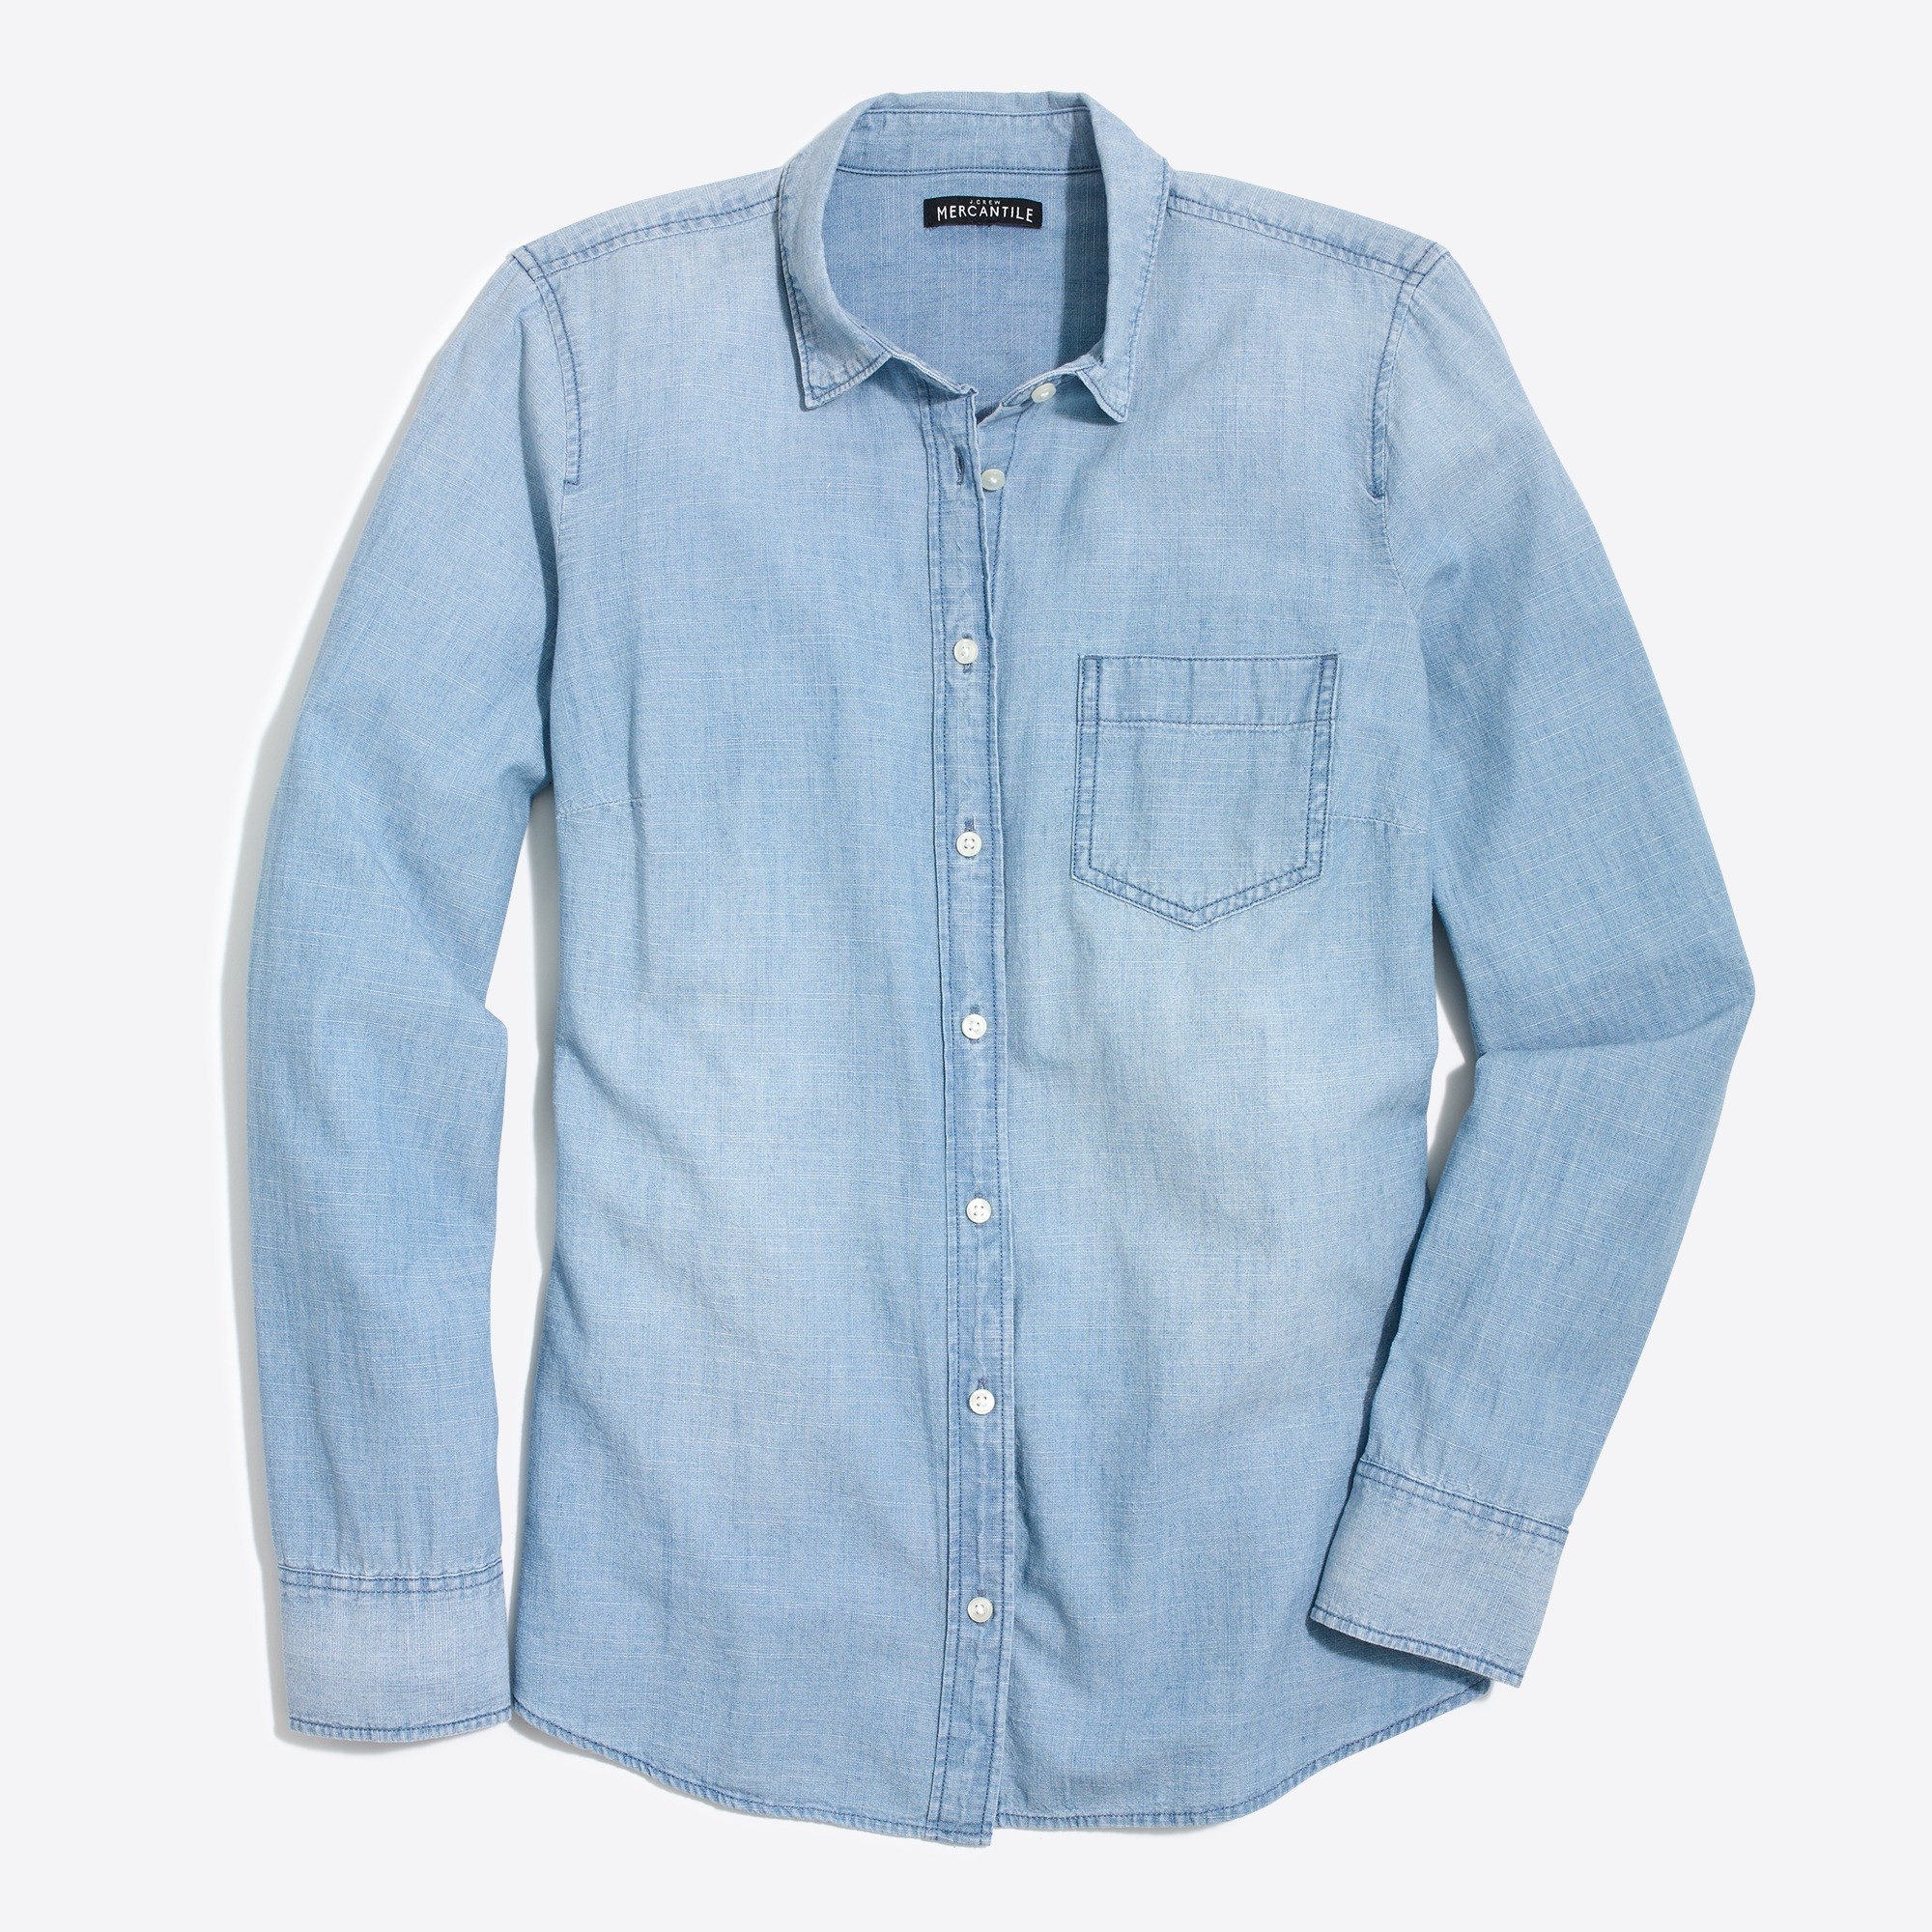 Petite chambray shirt in perfect fit : FactoryWomen Shirts & Tops